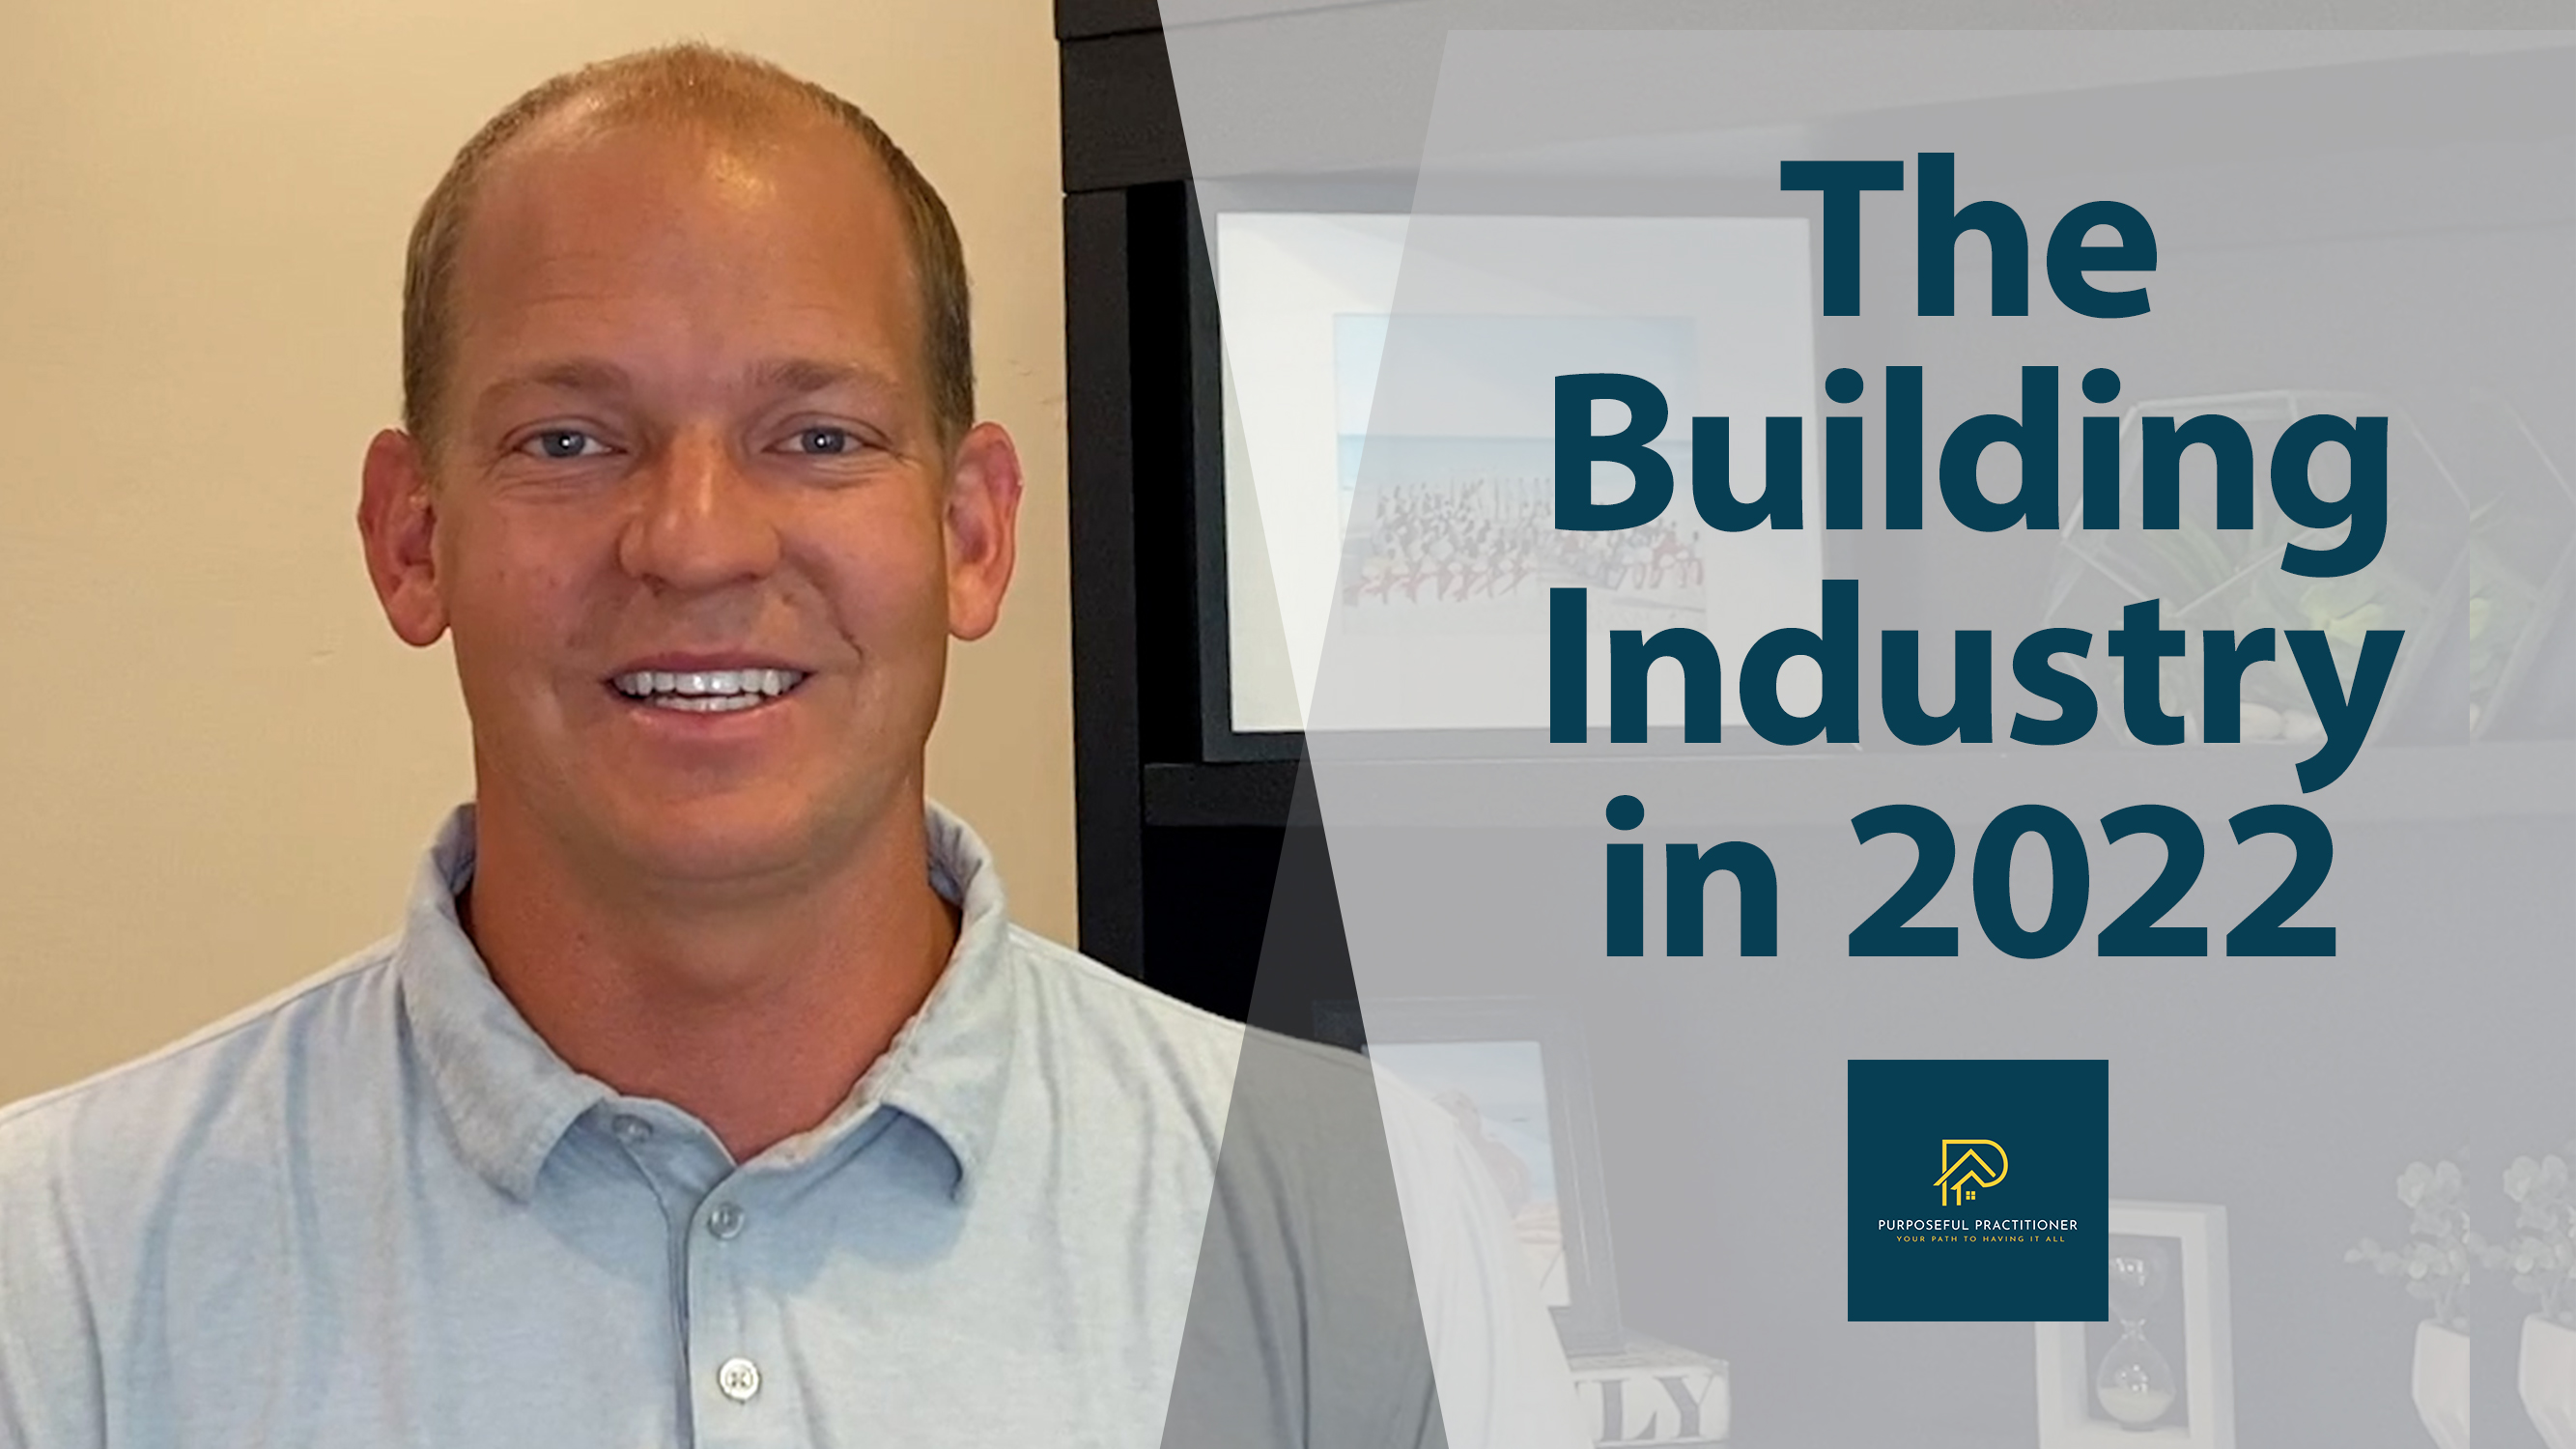 What To Expect From the Building Industry in 2022